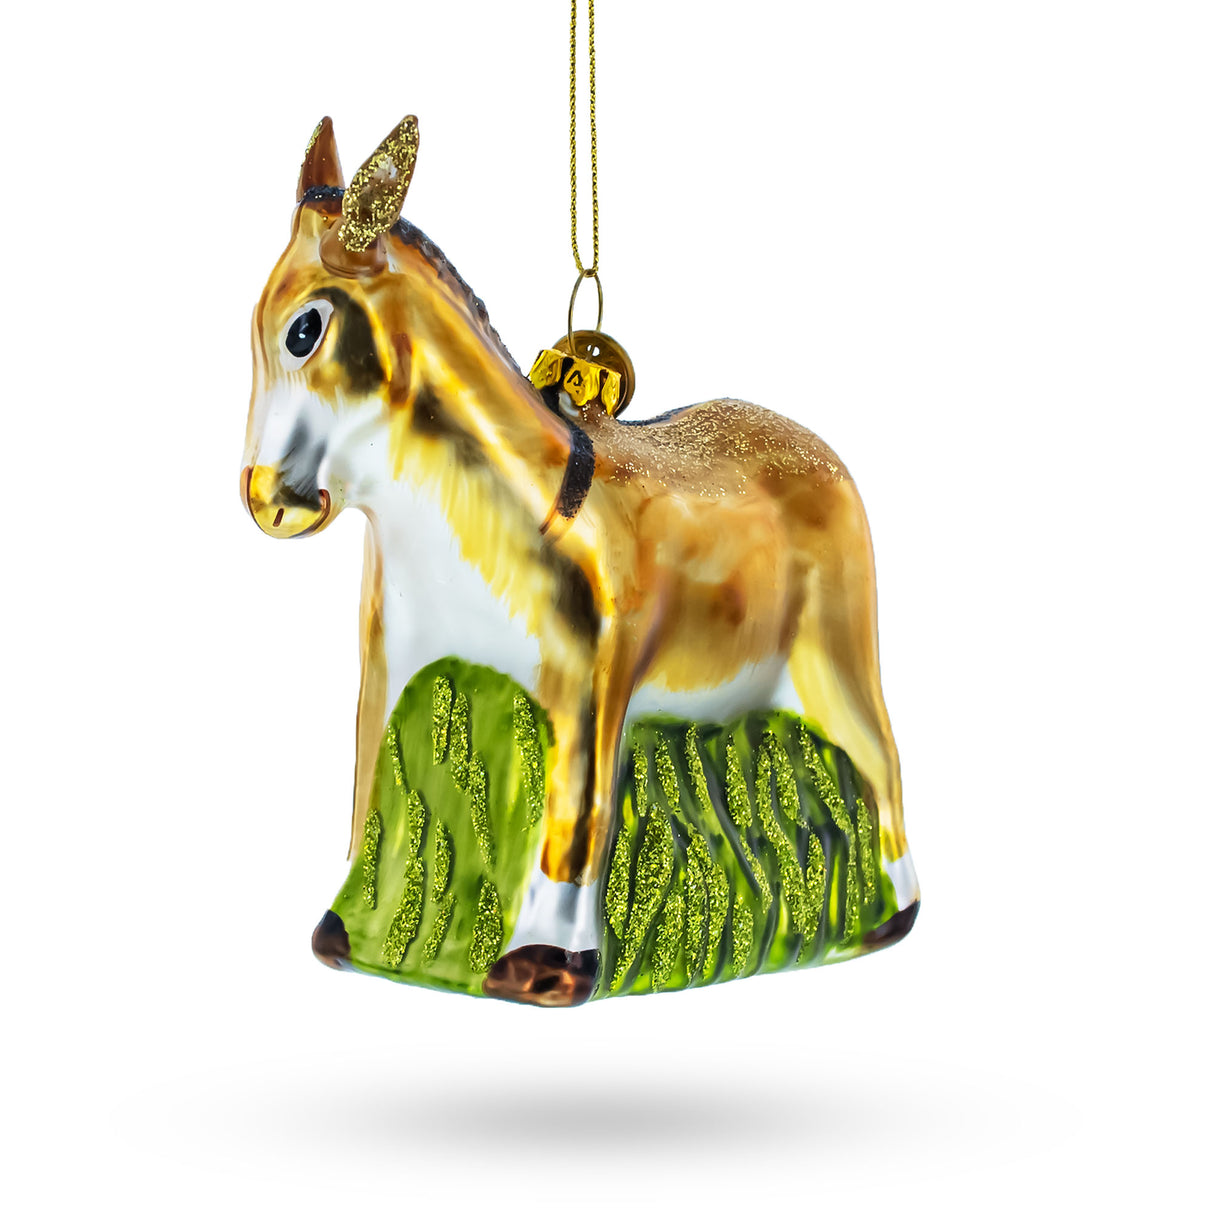 Donkey with Festive Decorations - Blown Glass Christmas Ornament in Multi color,  shape